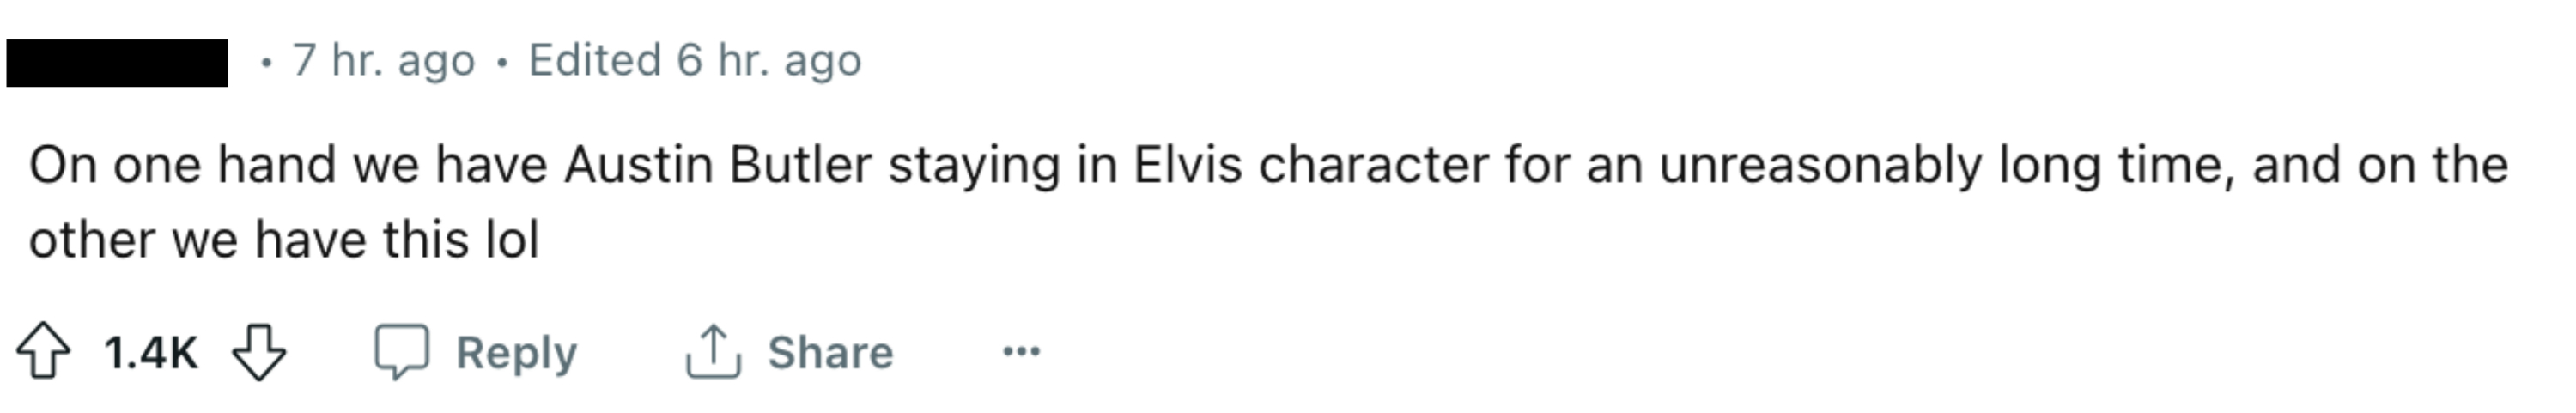 “On one hand we have Austin Butler staying in Elvis character for an unreasonably long time, and on the other we have this lol”